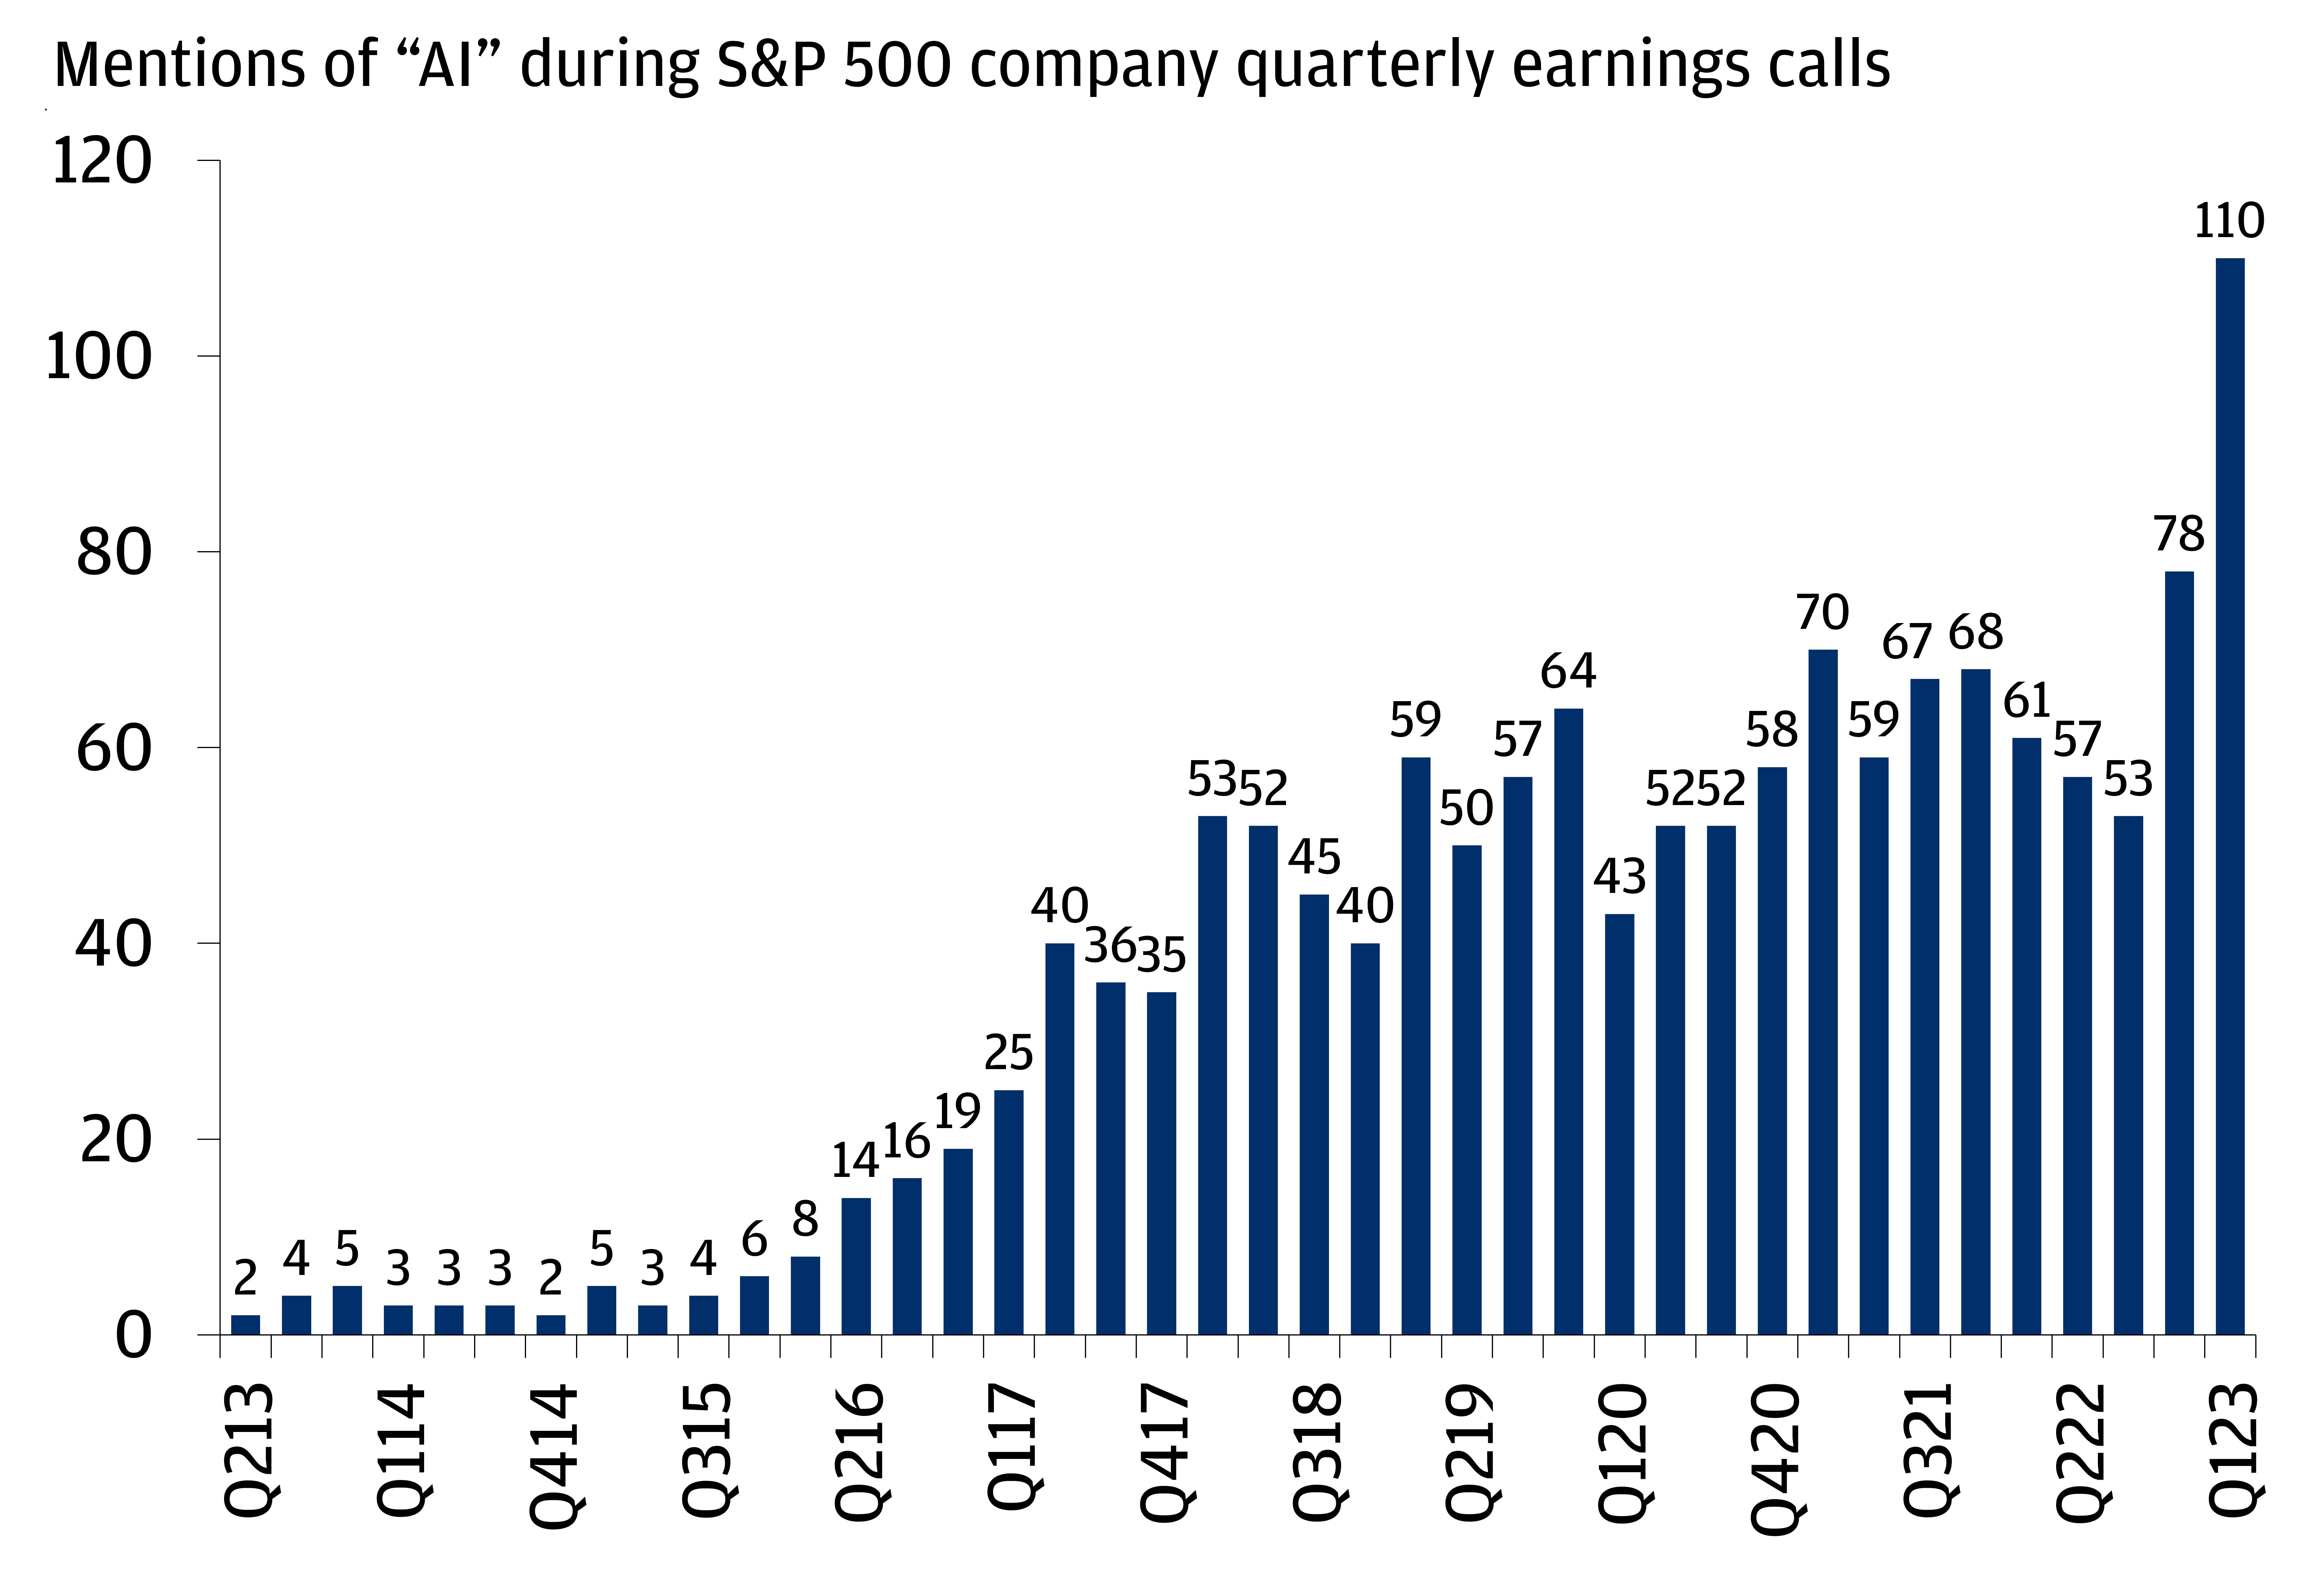 This chart showcases the number of citations of the phrase “AI” in S&P 500 company earnings calls from 2013 to 2023.